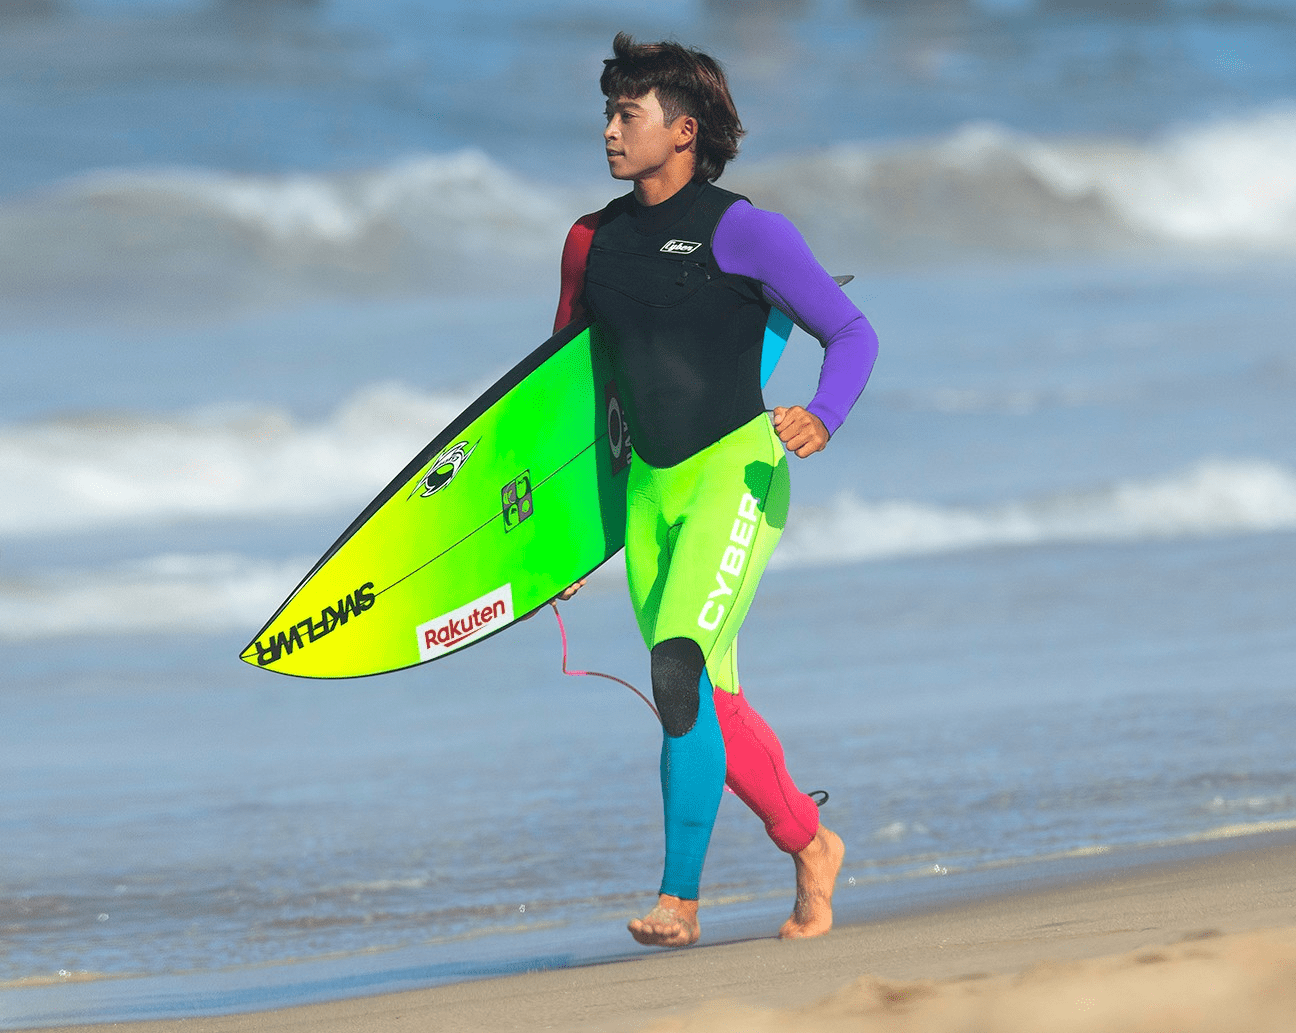 22-year-old Kei Kobayashi from San Clemente, California represents Rakuten on the waves. He talks about his goals as a surfer with a positive mindset.